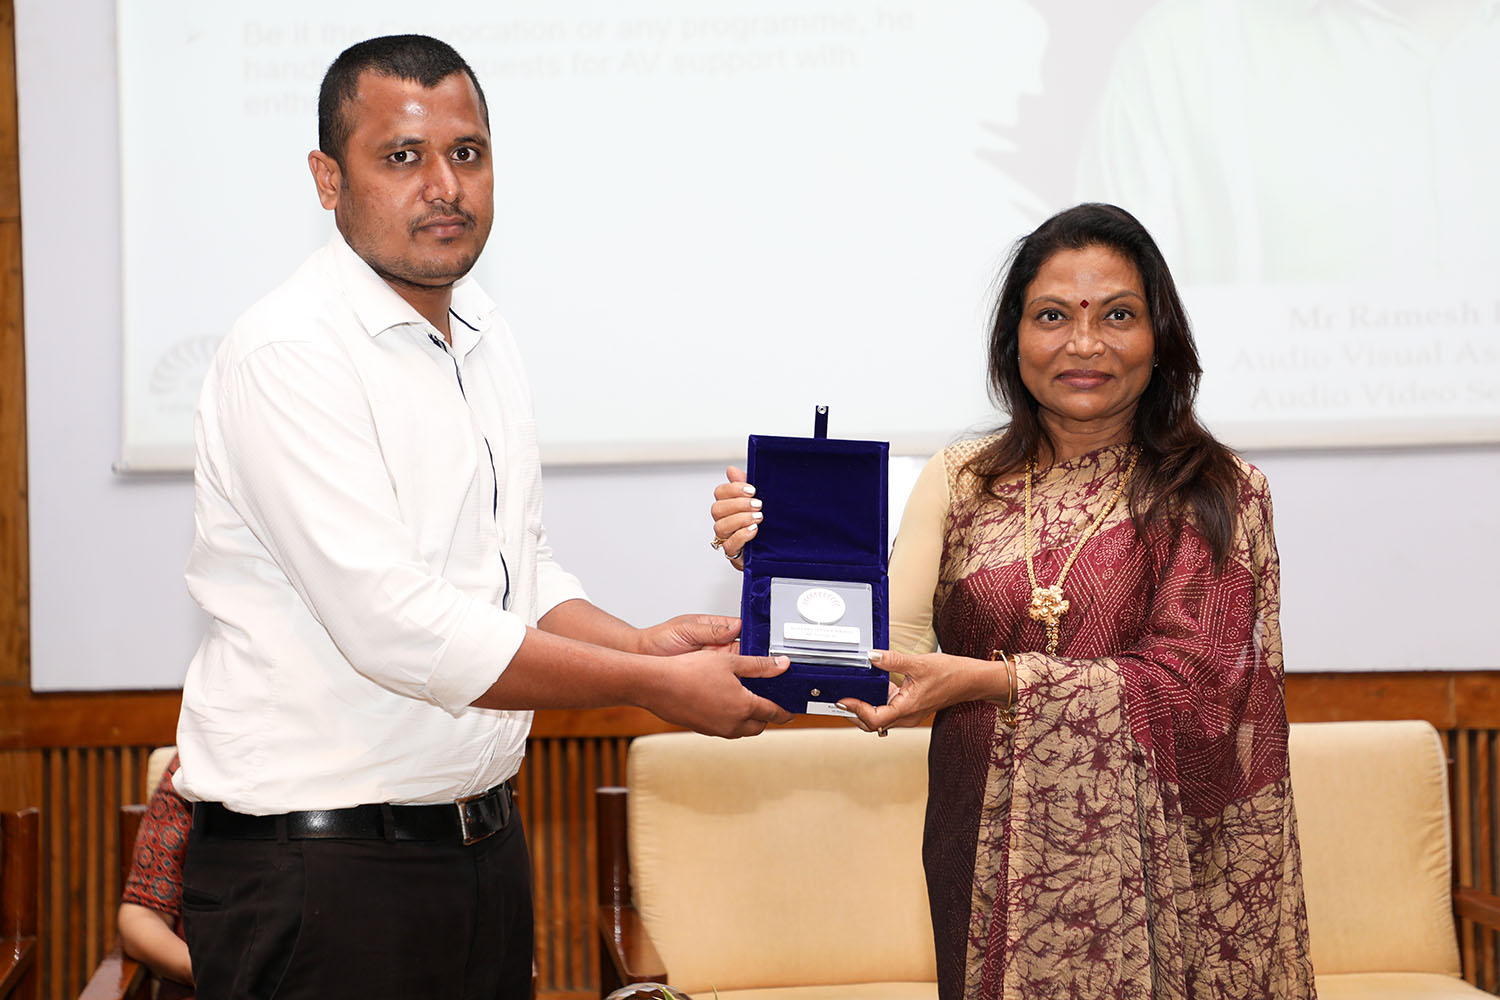 Mr Ramesh BC, Audio Visual Assistant, receives the award for 10 years of service from Ms. Kalpana Saroj, Member of the Board of Governors, IIMB, during the institute’s 49th Foundation Day celebrations.